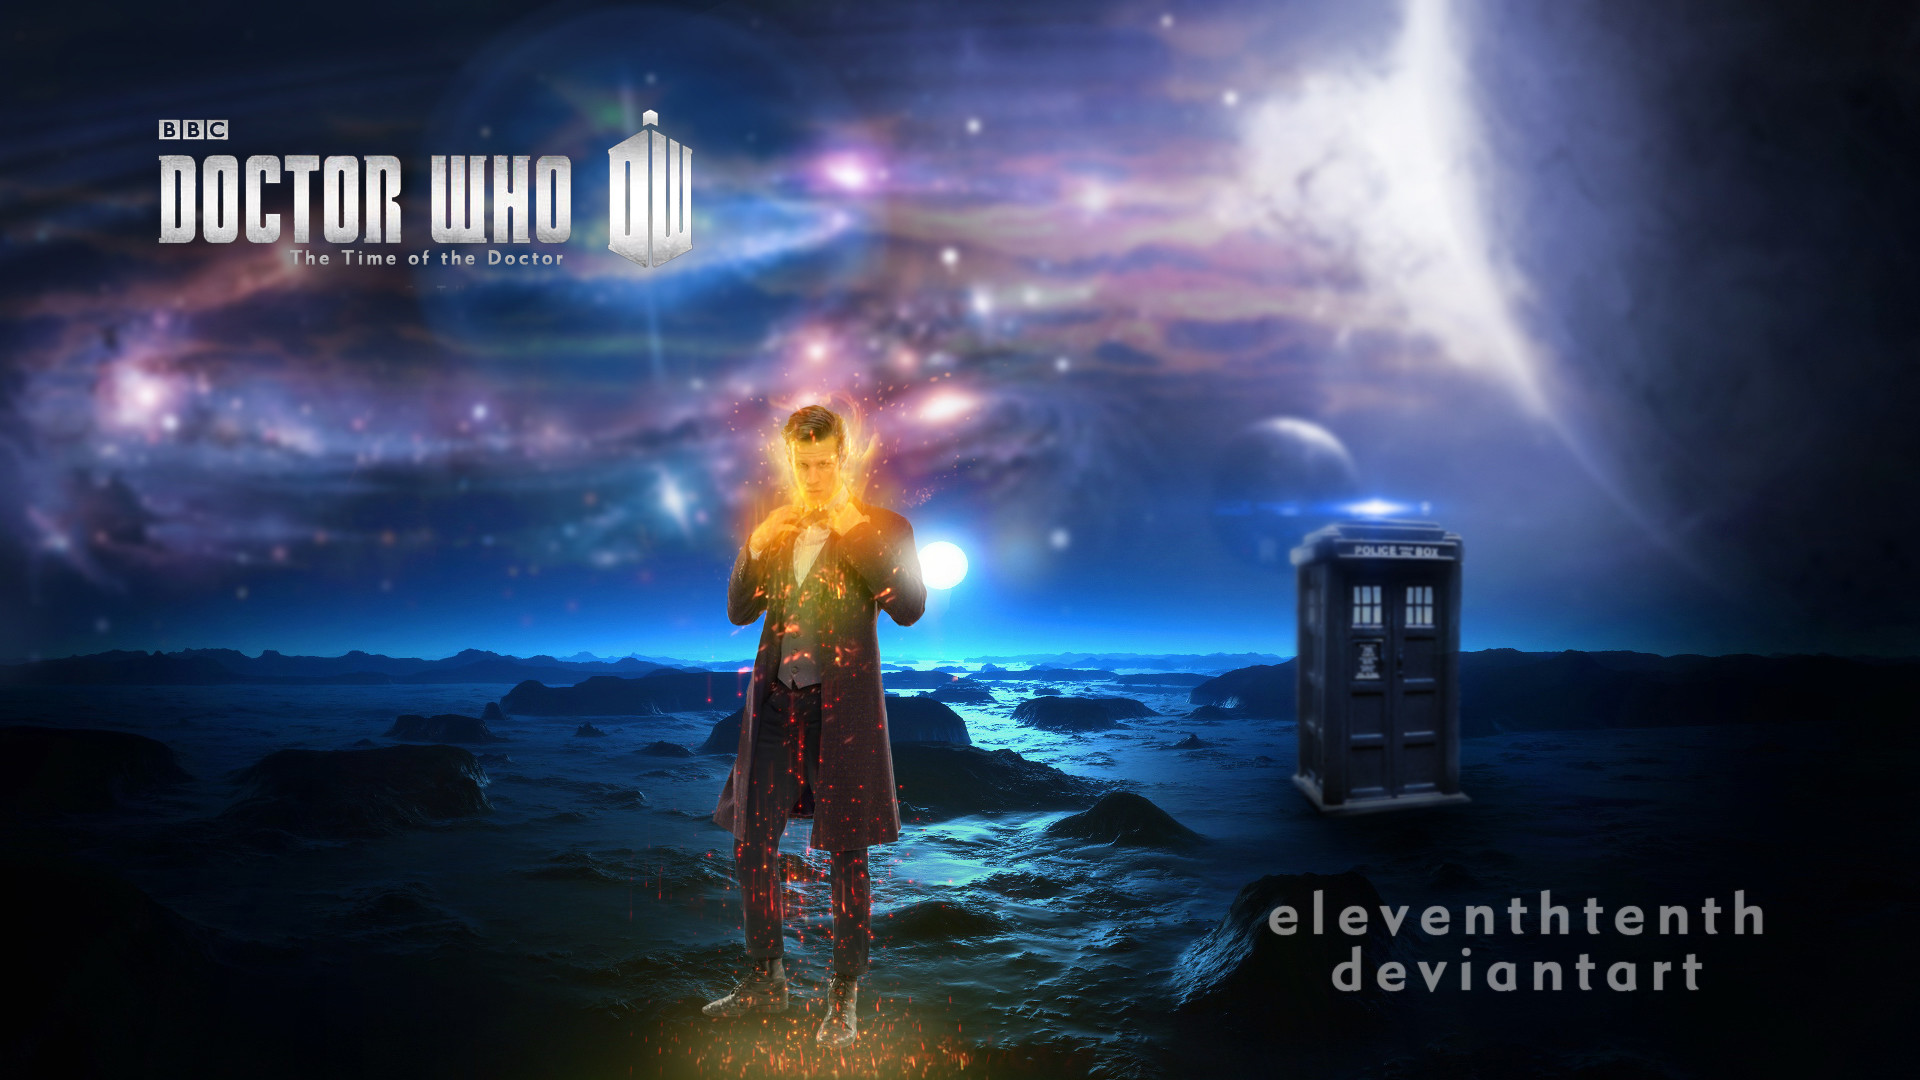 The Doctor And Amy Pond Doctor Who Wallpaper Doctor Who Wallpapers Matt Smith Wallpapers